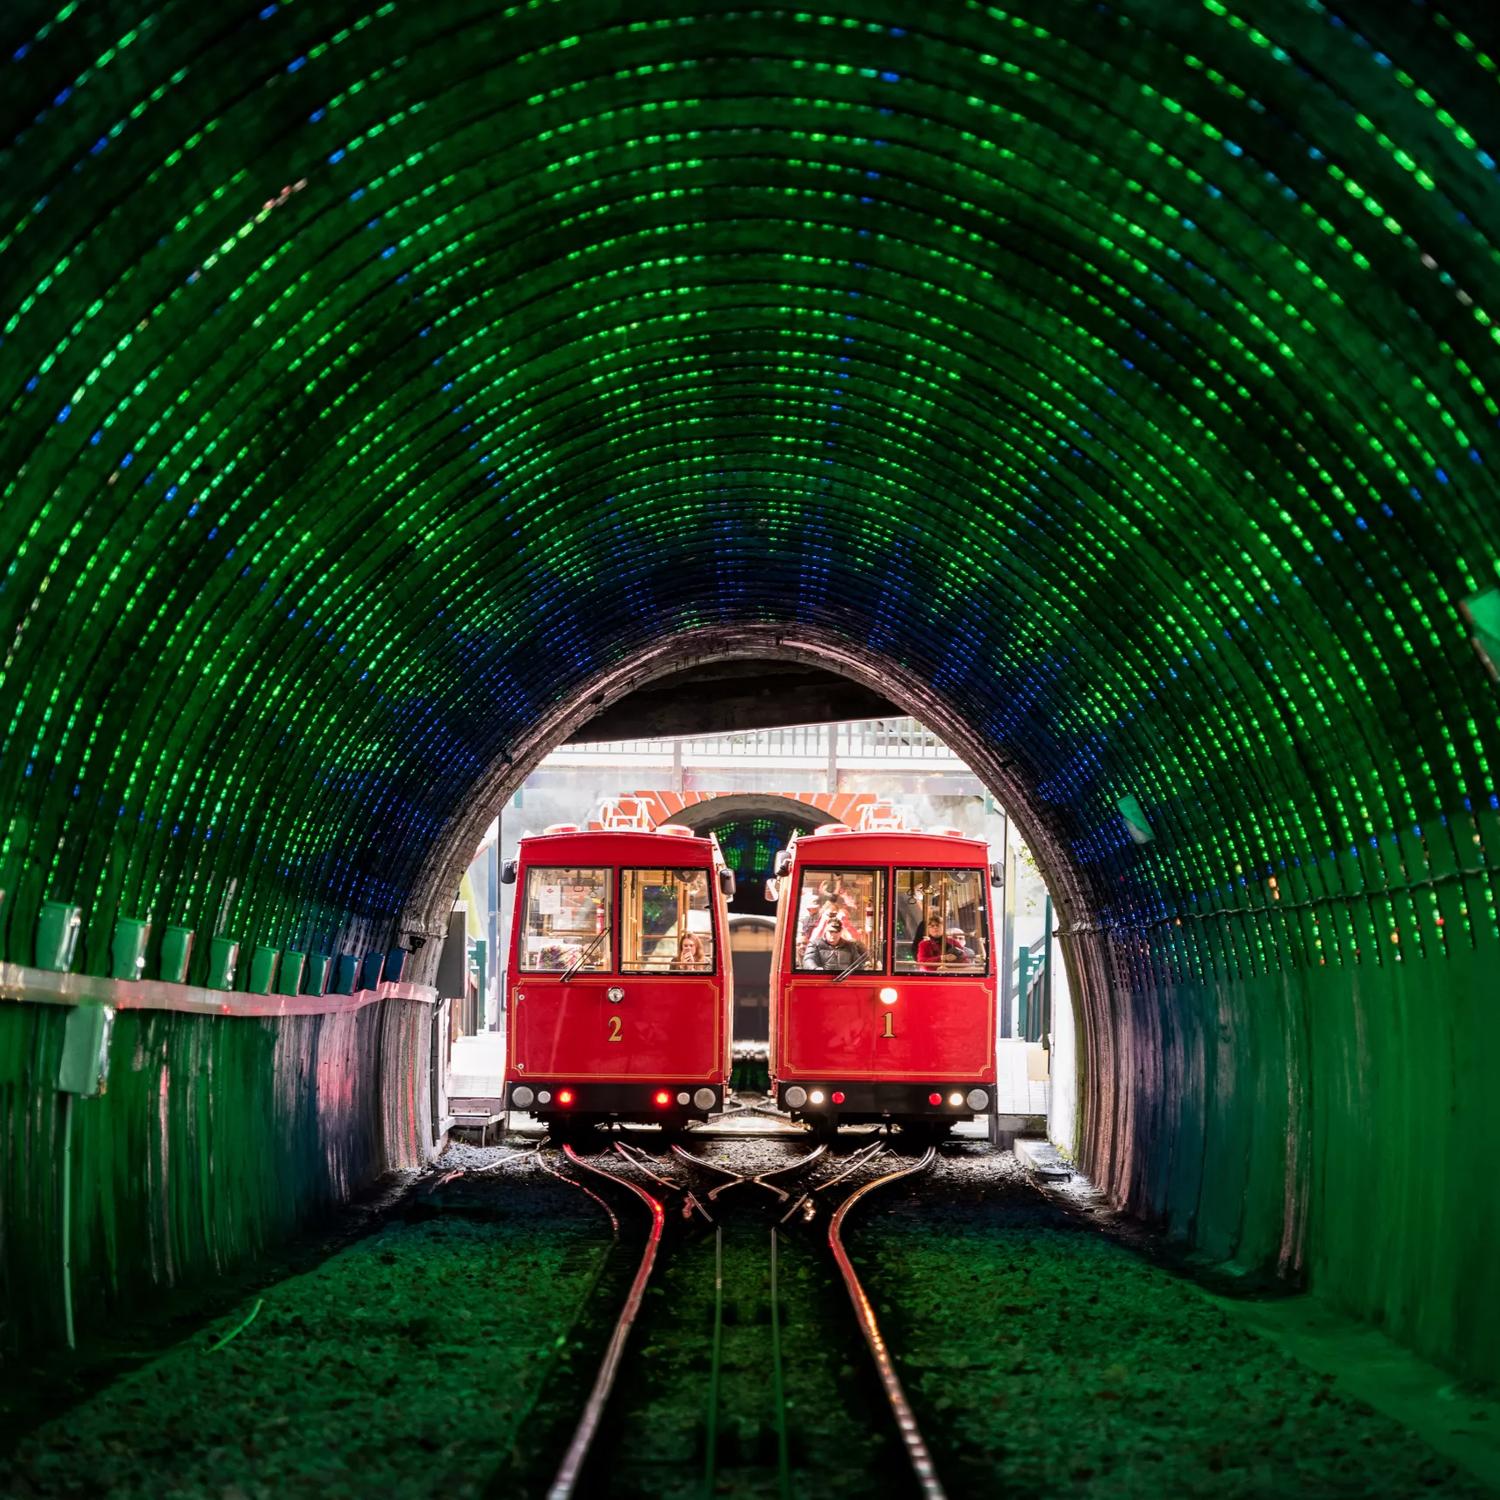 Looking into the Cable Car tunnel, with green LED lights lighting the inside and the 2 Cable cars meet in the middle of the tracks side by side.